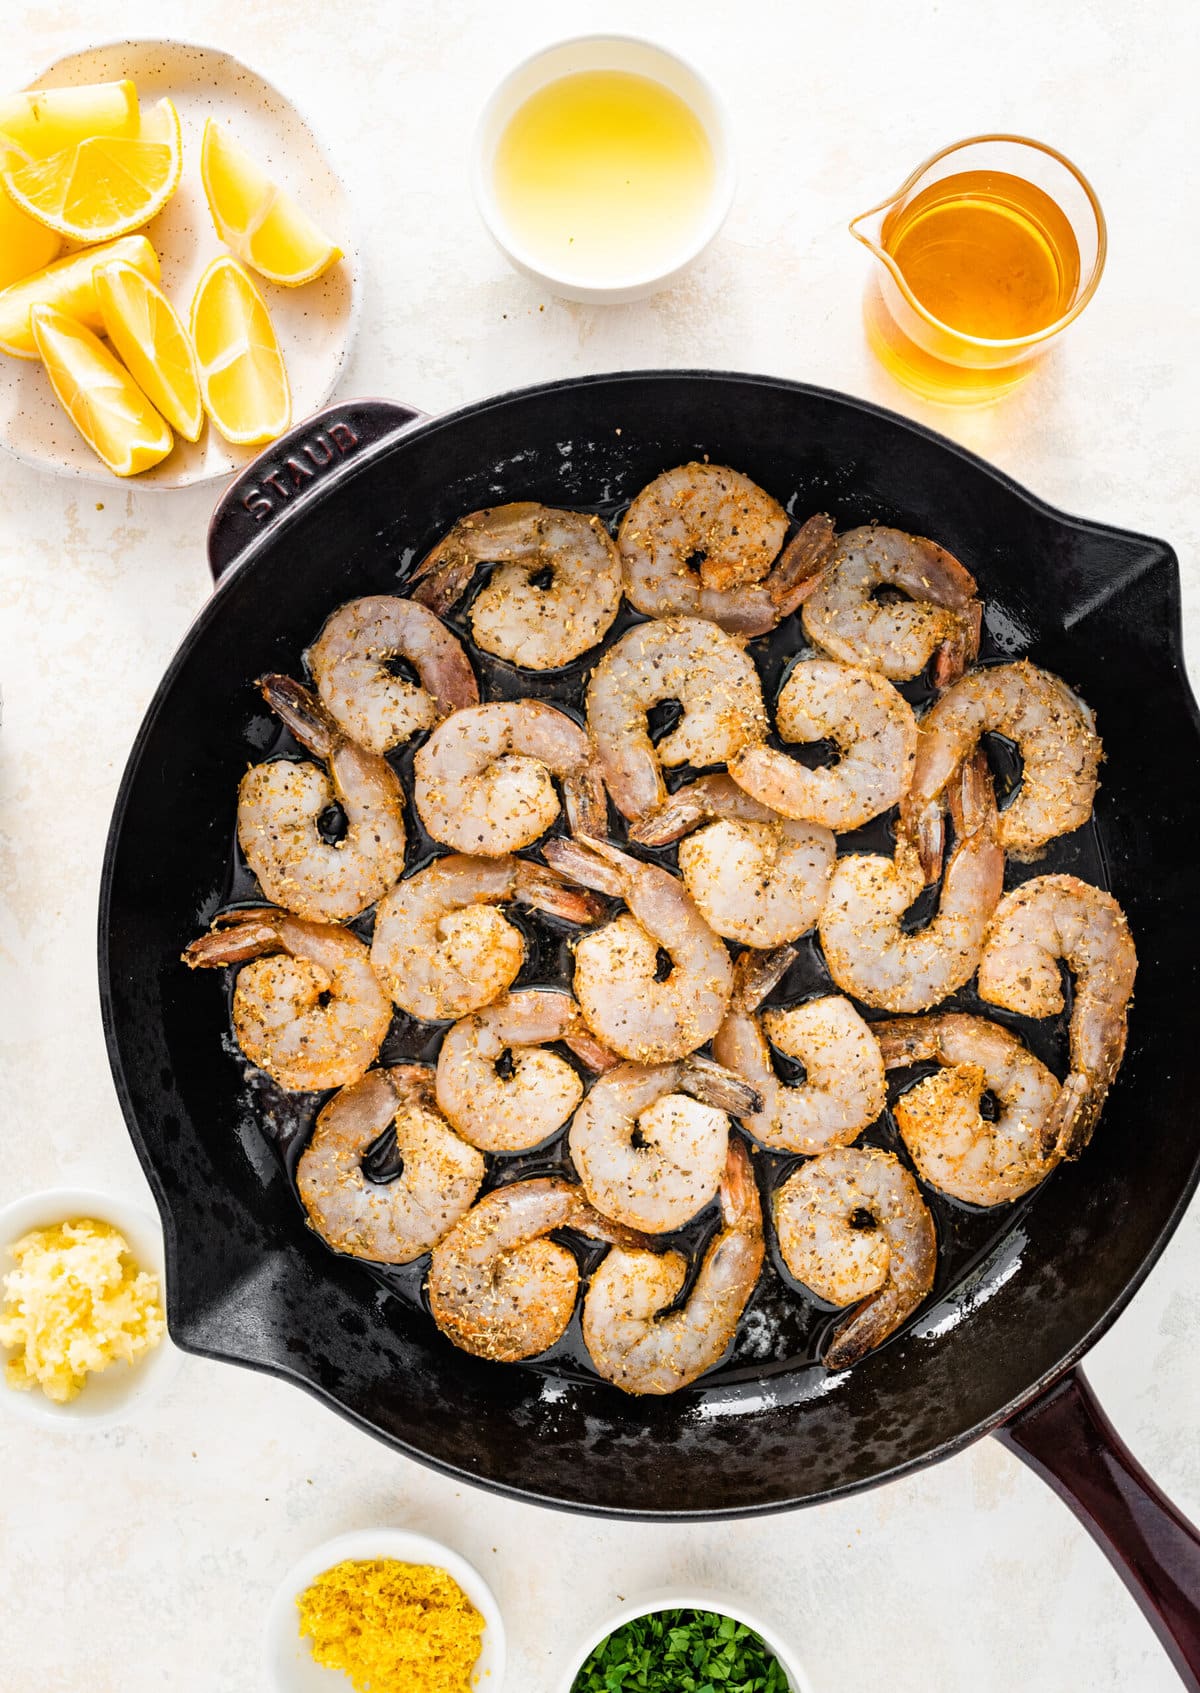 How to make easy pan seared shrimp step-by-step: adding the shrimp to the hot skillet.